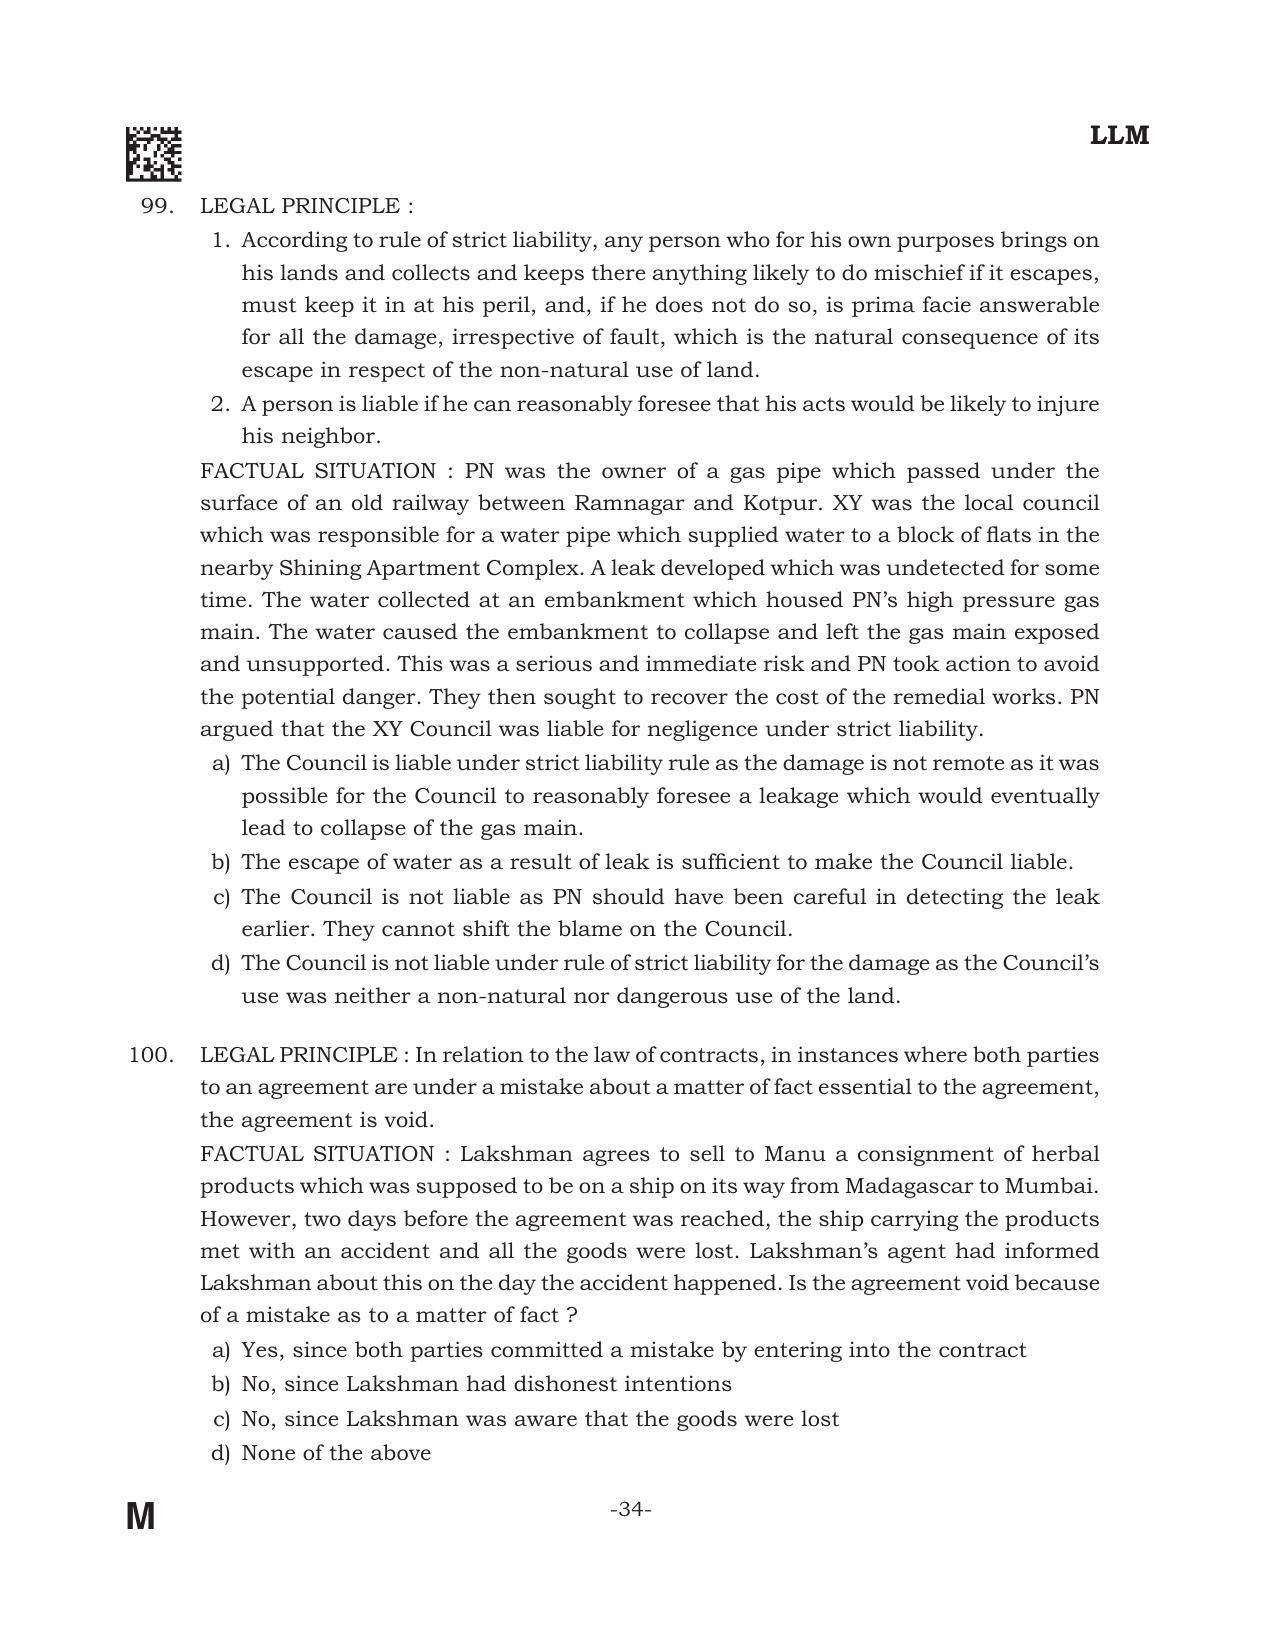 AILET 2022 Question Paper for LL.M - Page 34